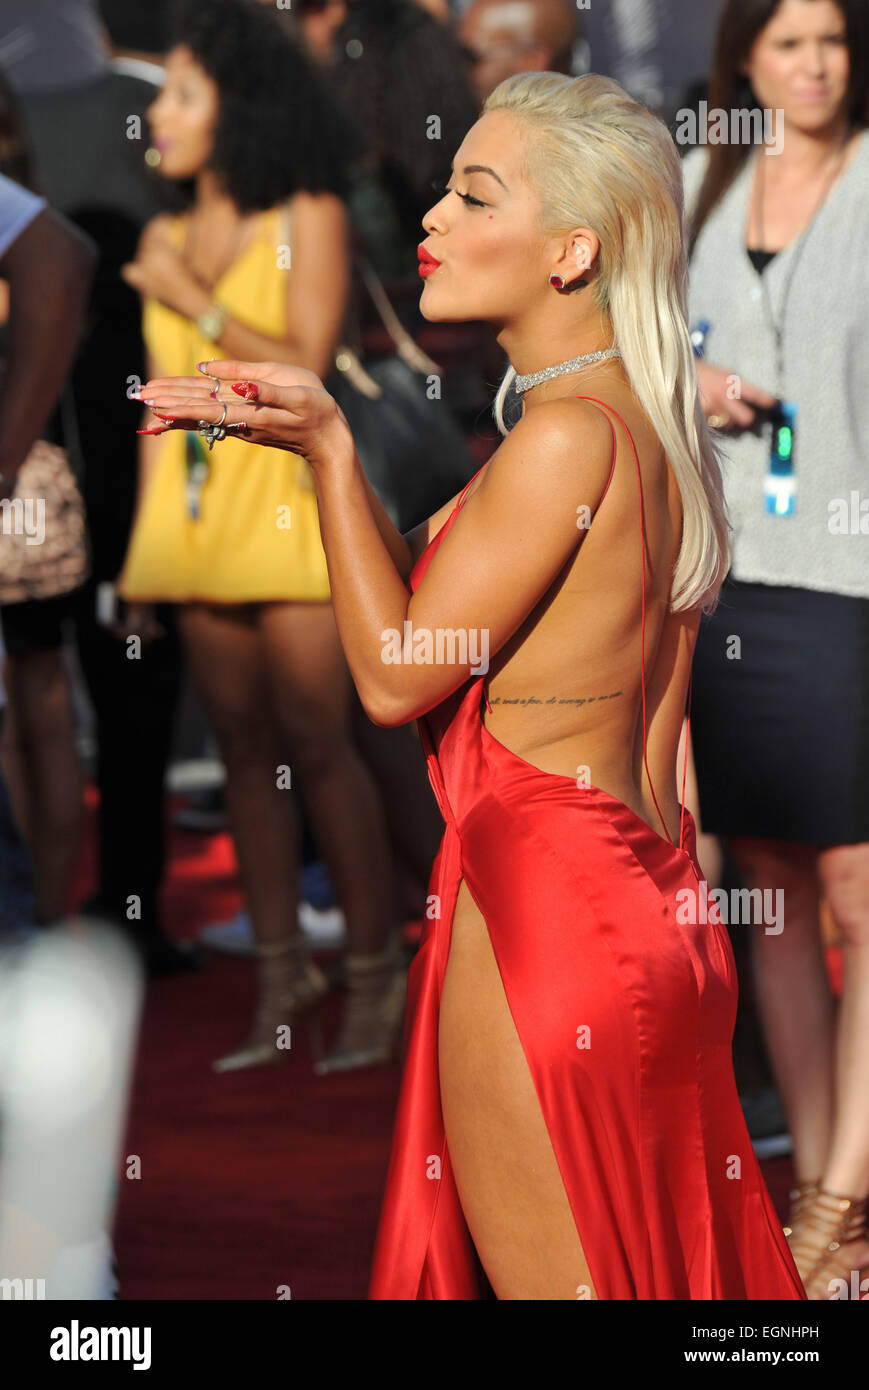 LOS ANGELES, CA - AUGUST 24, 2014: Rita Ora at the 2014 MTV Video Music Awards at the Forum, Los Angeles. Stock Photo